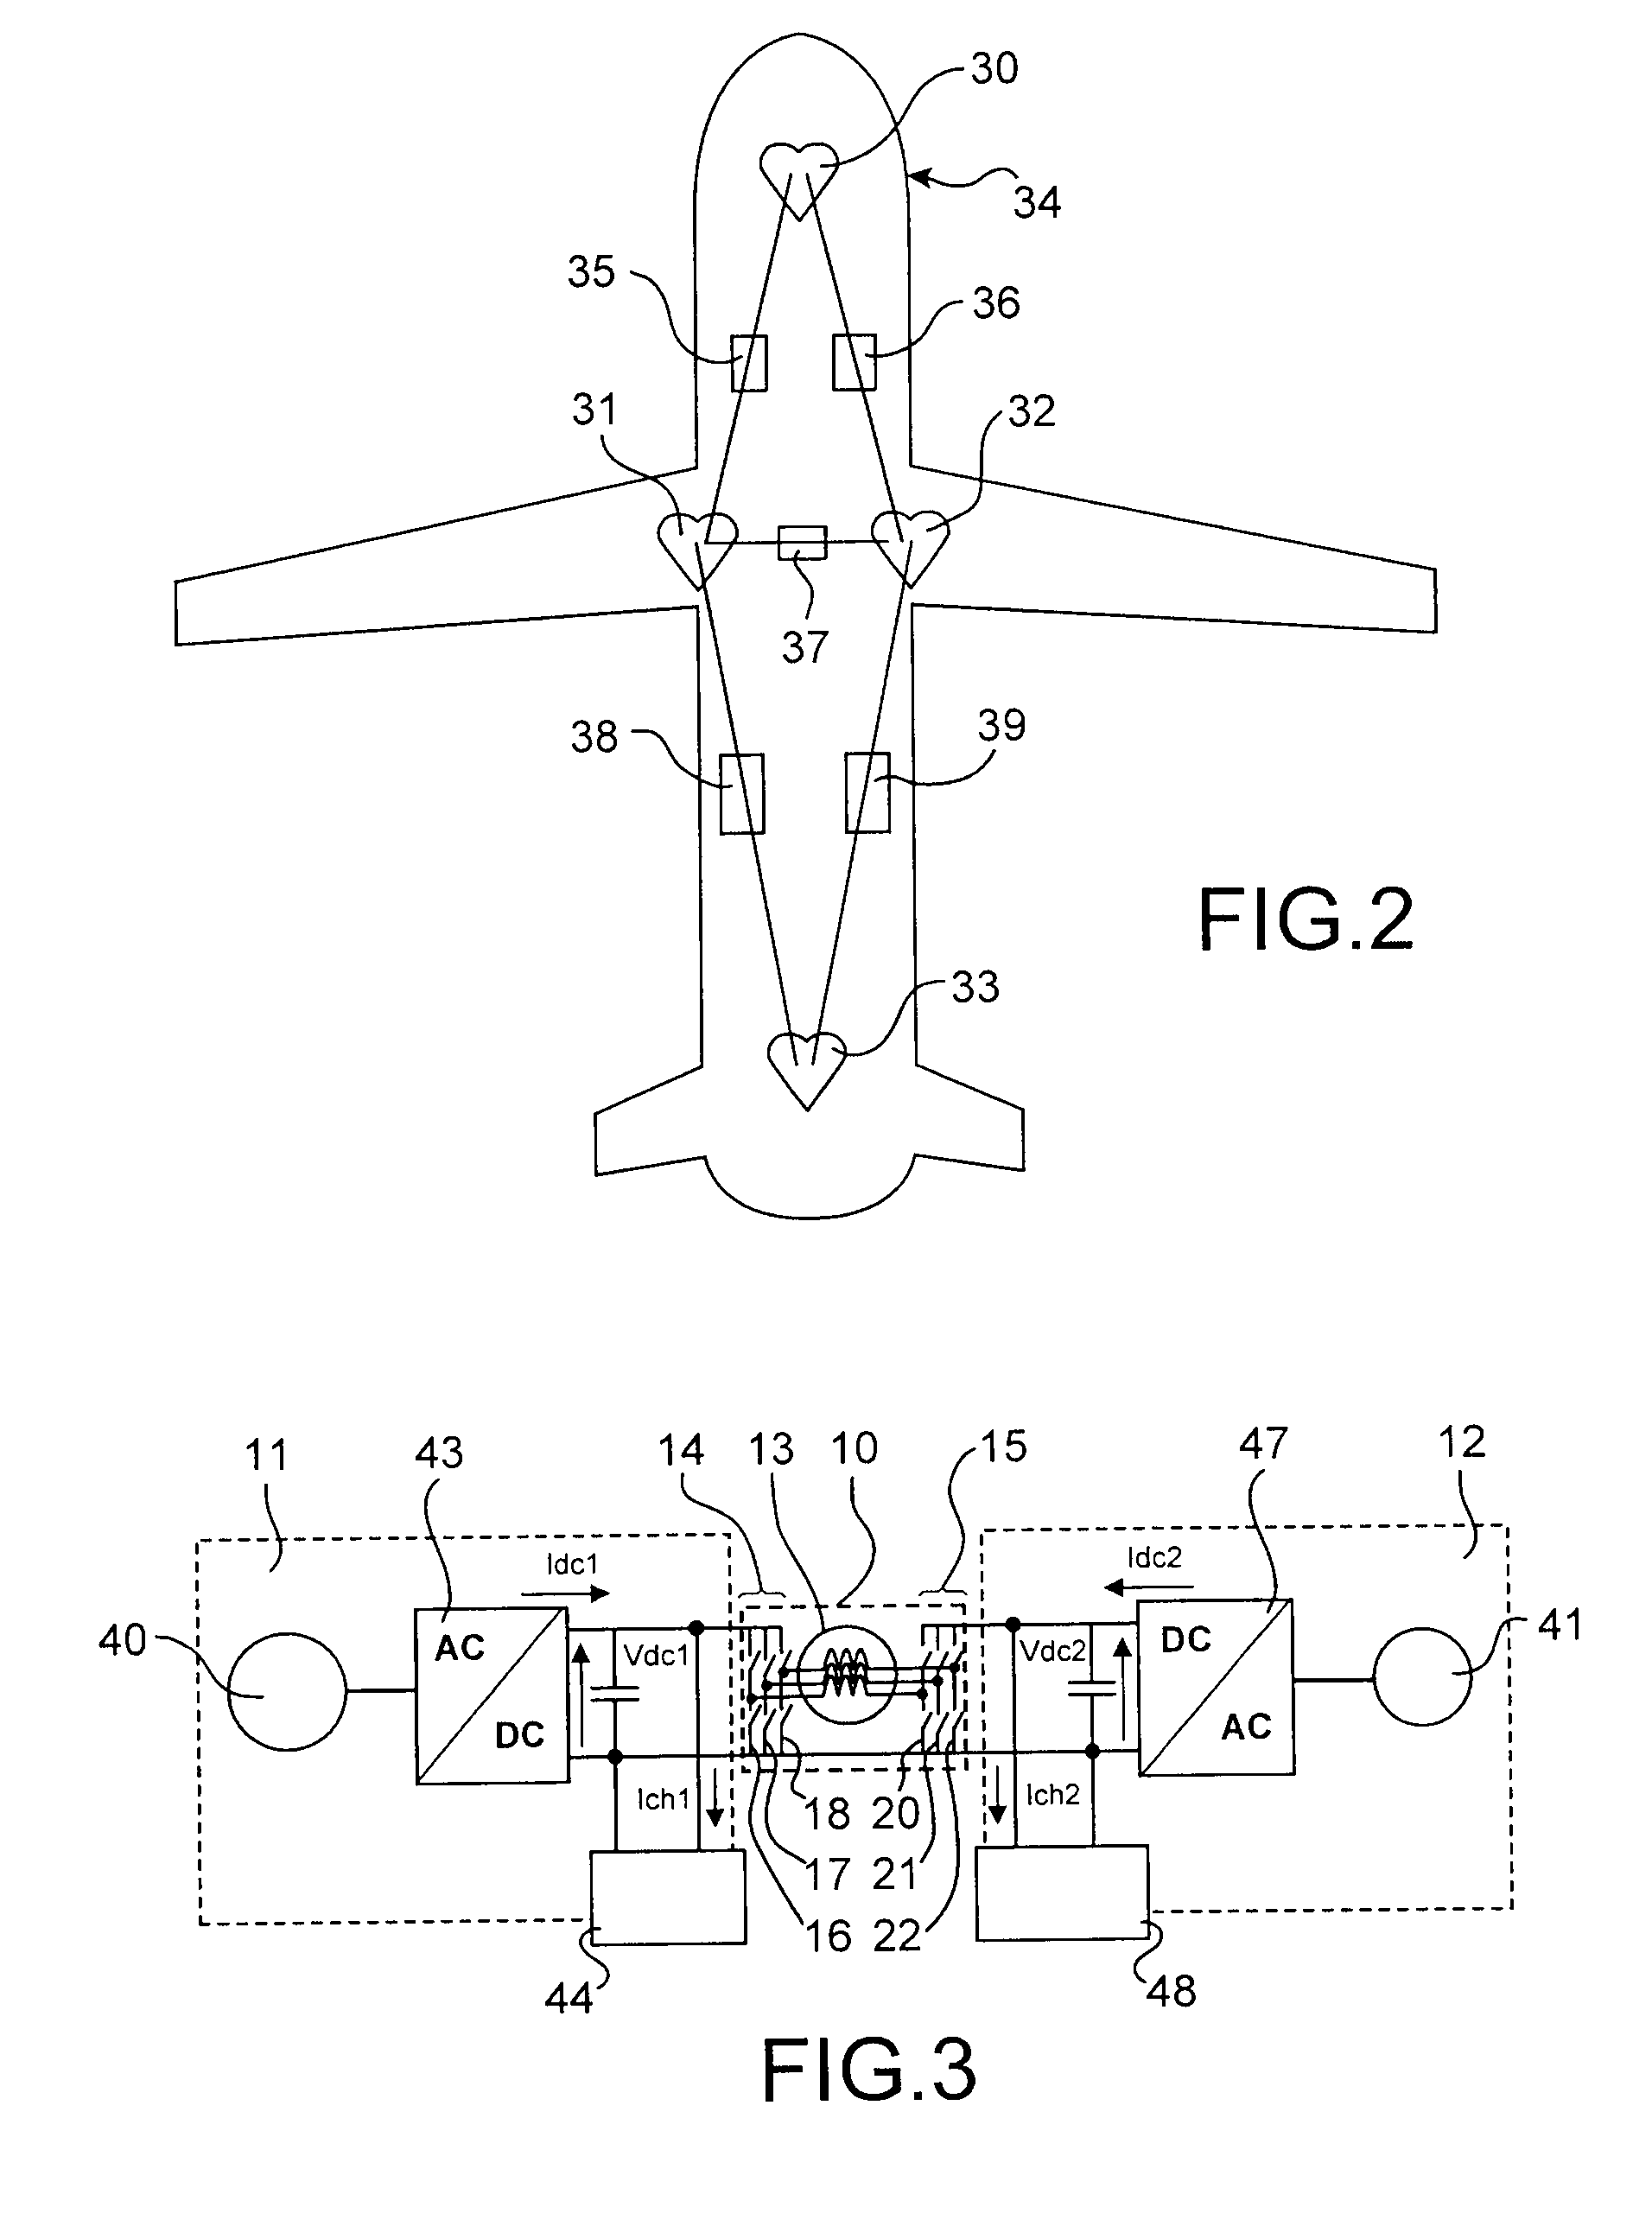 Mixed Device for Controlling Power Transfer Between Two Cores of a Direct Current Network and Supplying an Alternating Current Motor